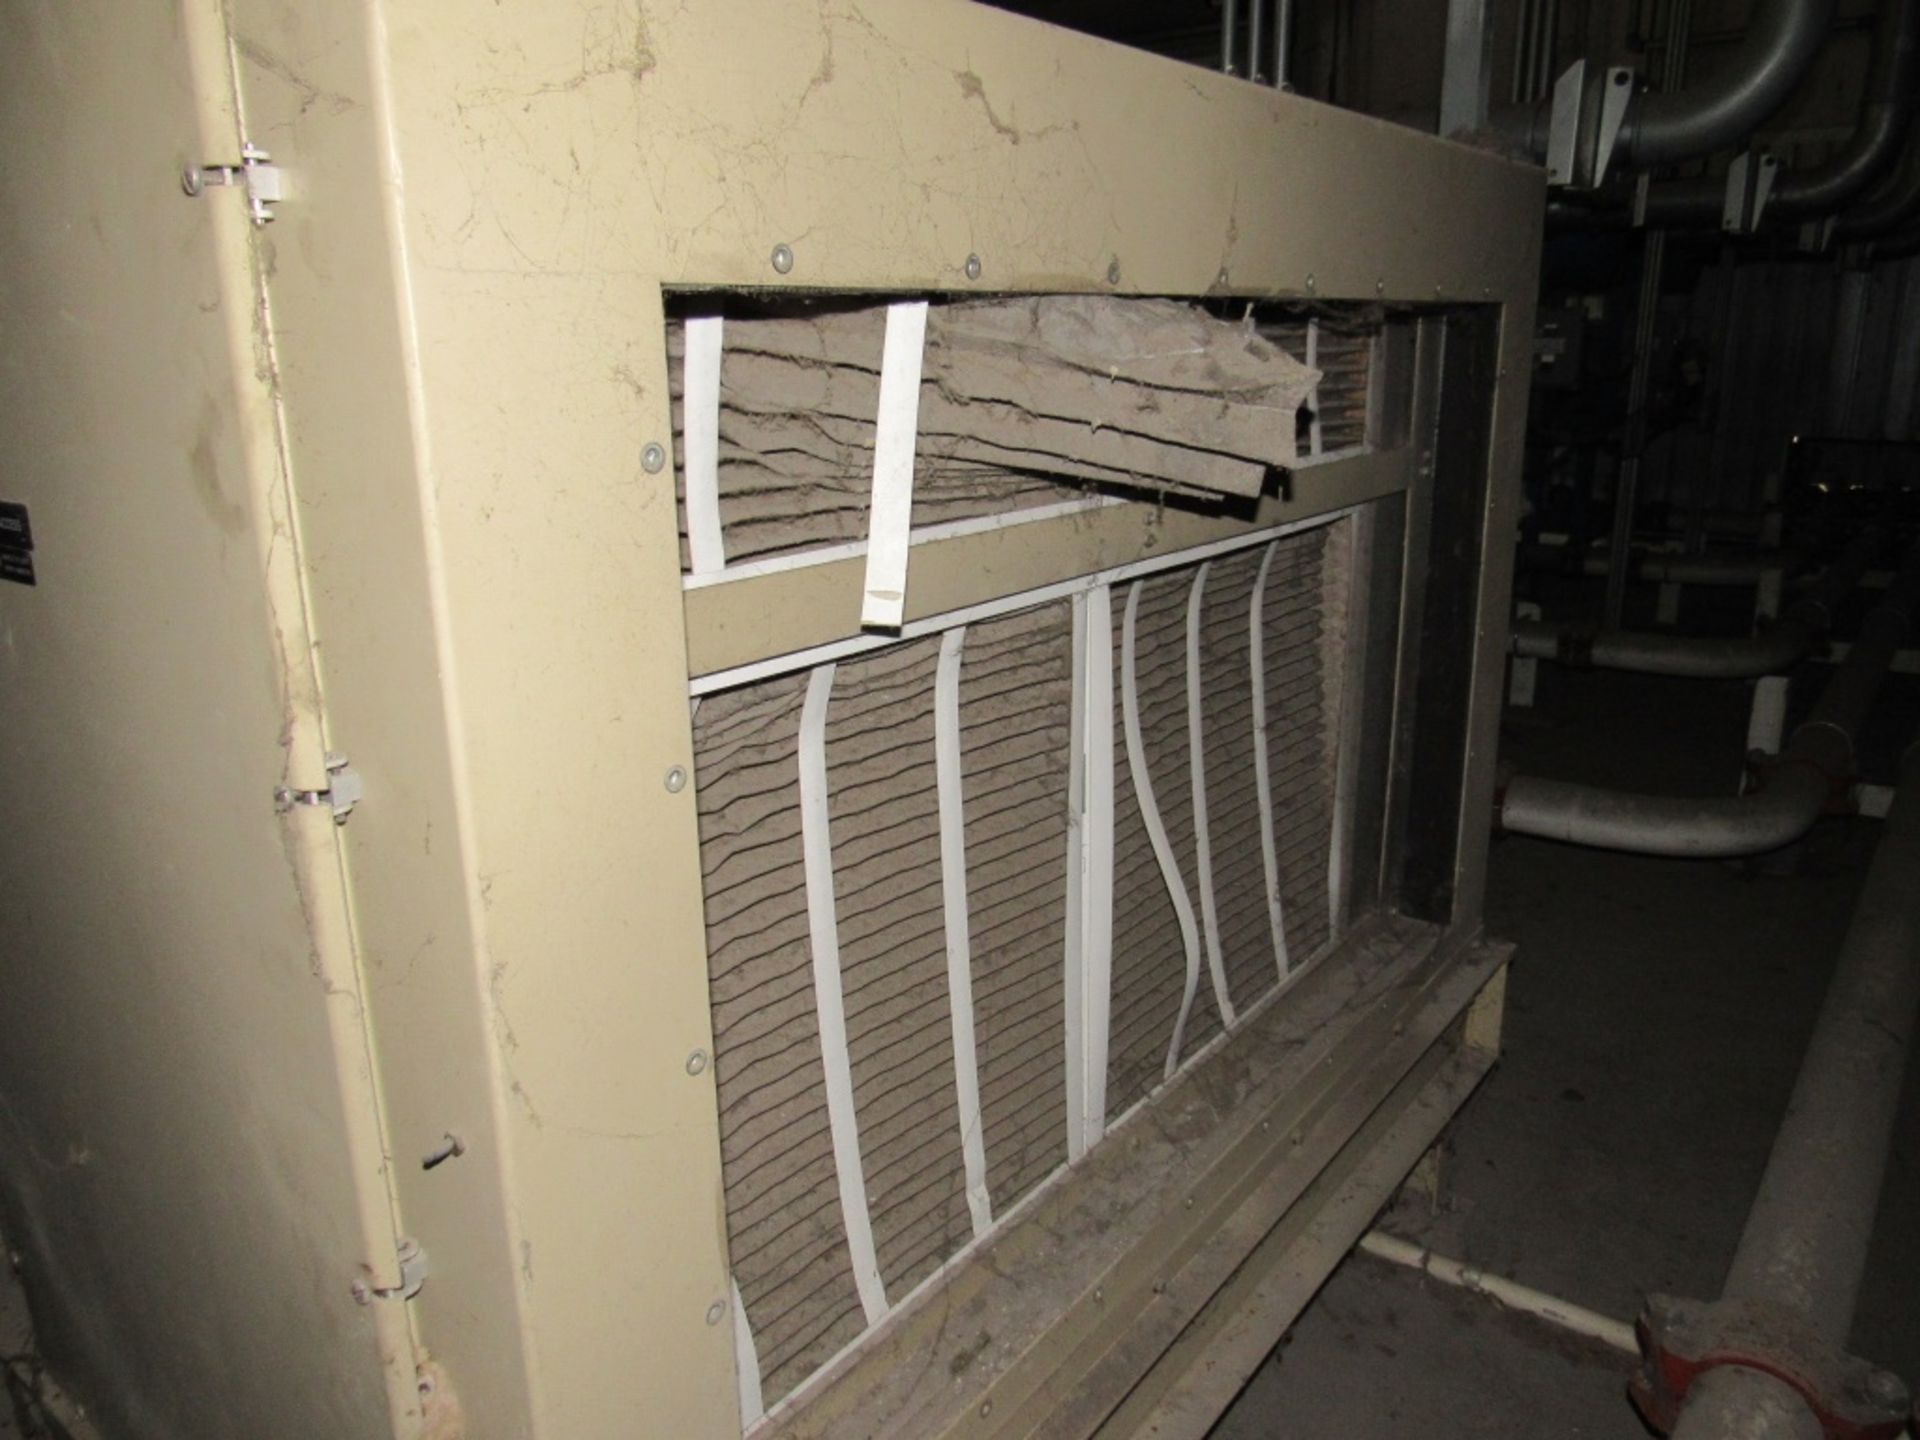 Munters Dehumidifier- Model - HCD-2250-FBA-SFCBS Rigging Fee - $250.00 "TVA will disconnect and - Image 12 of 17